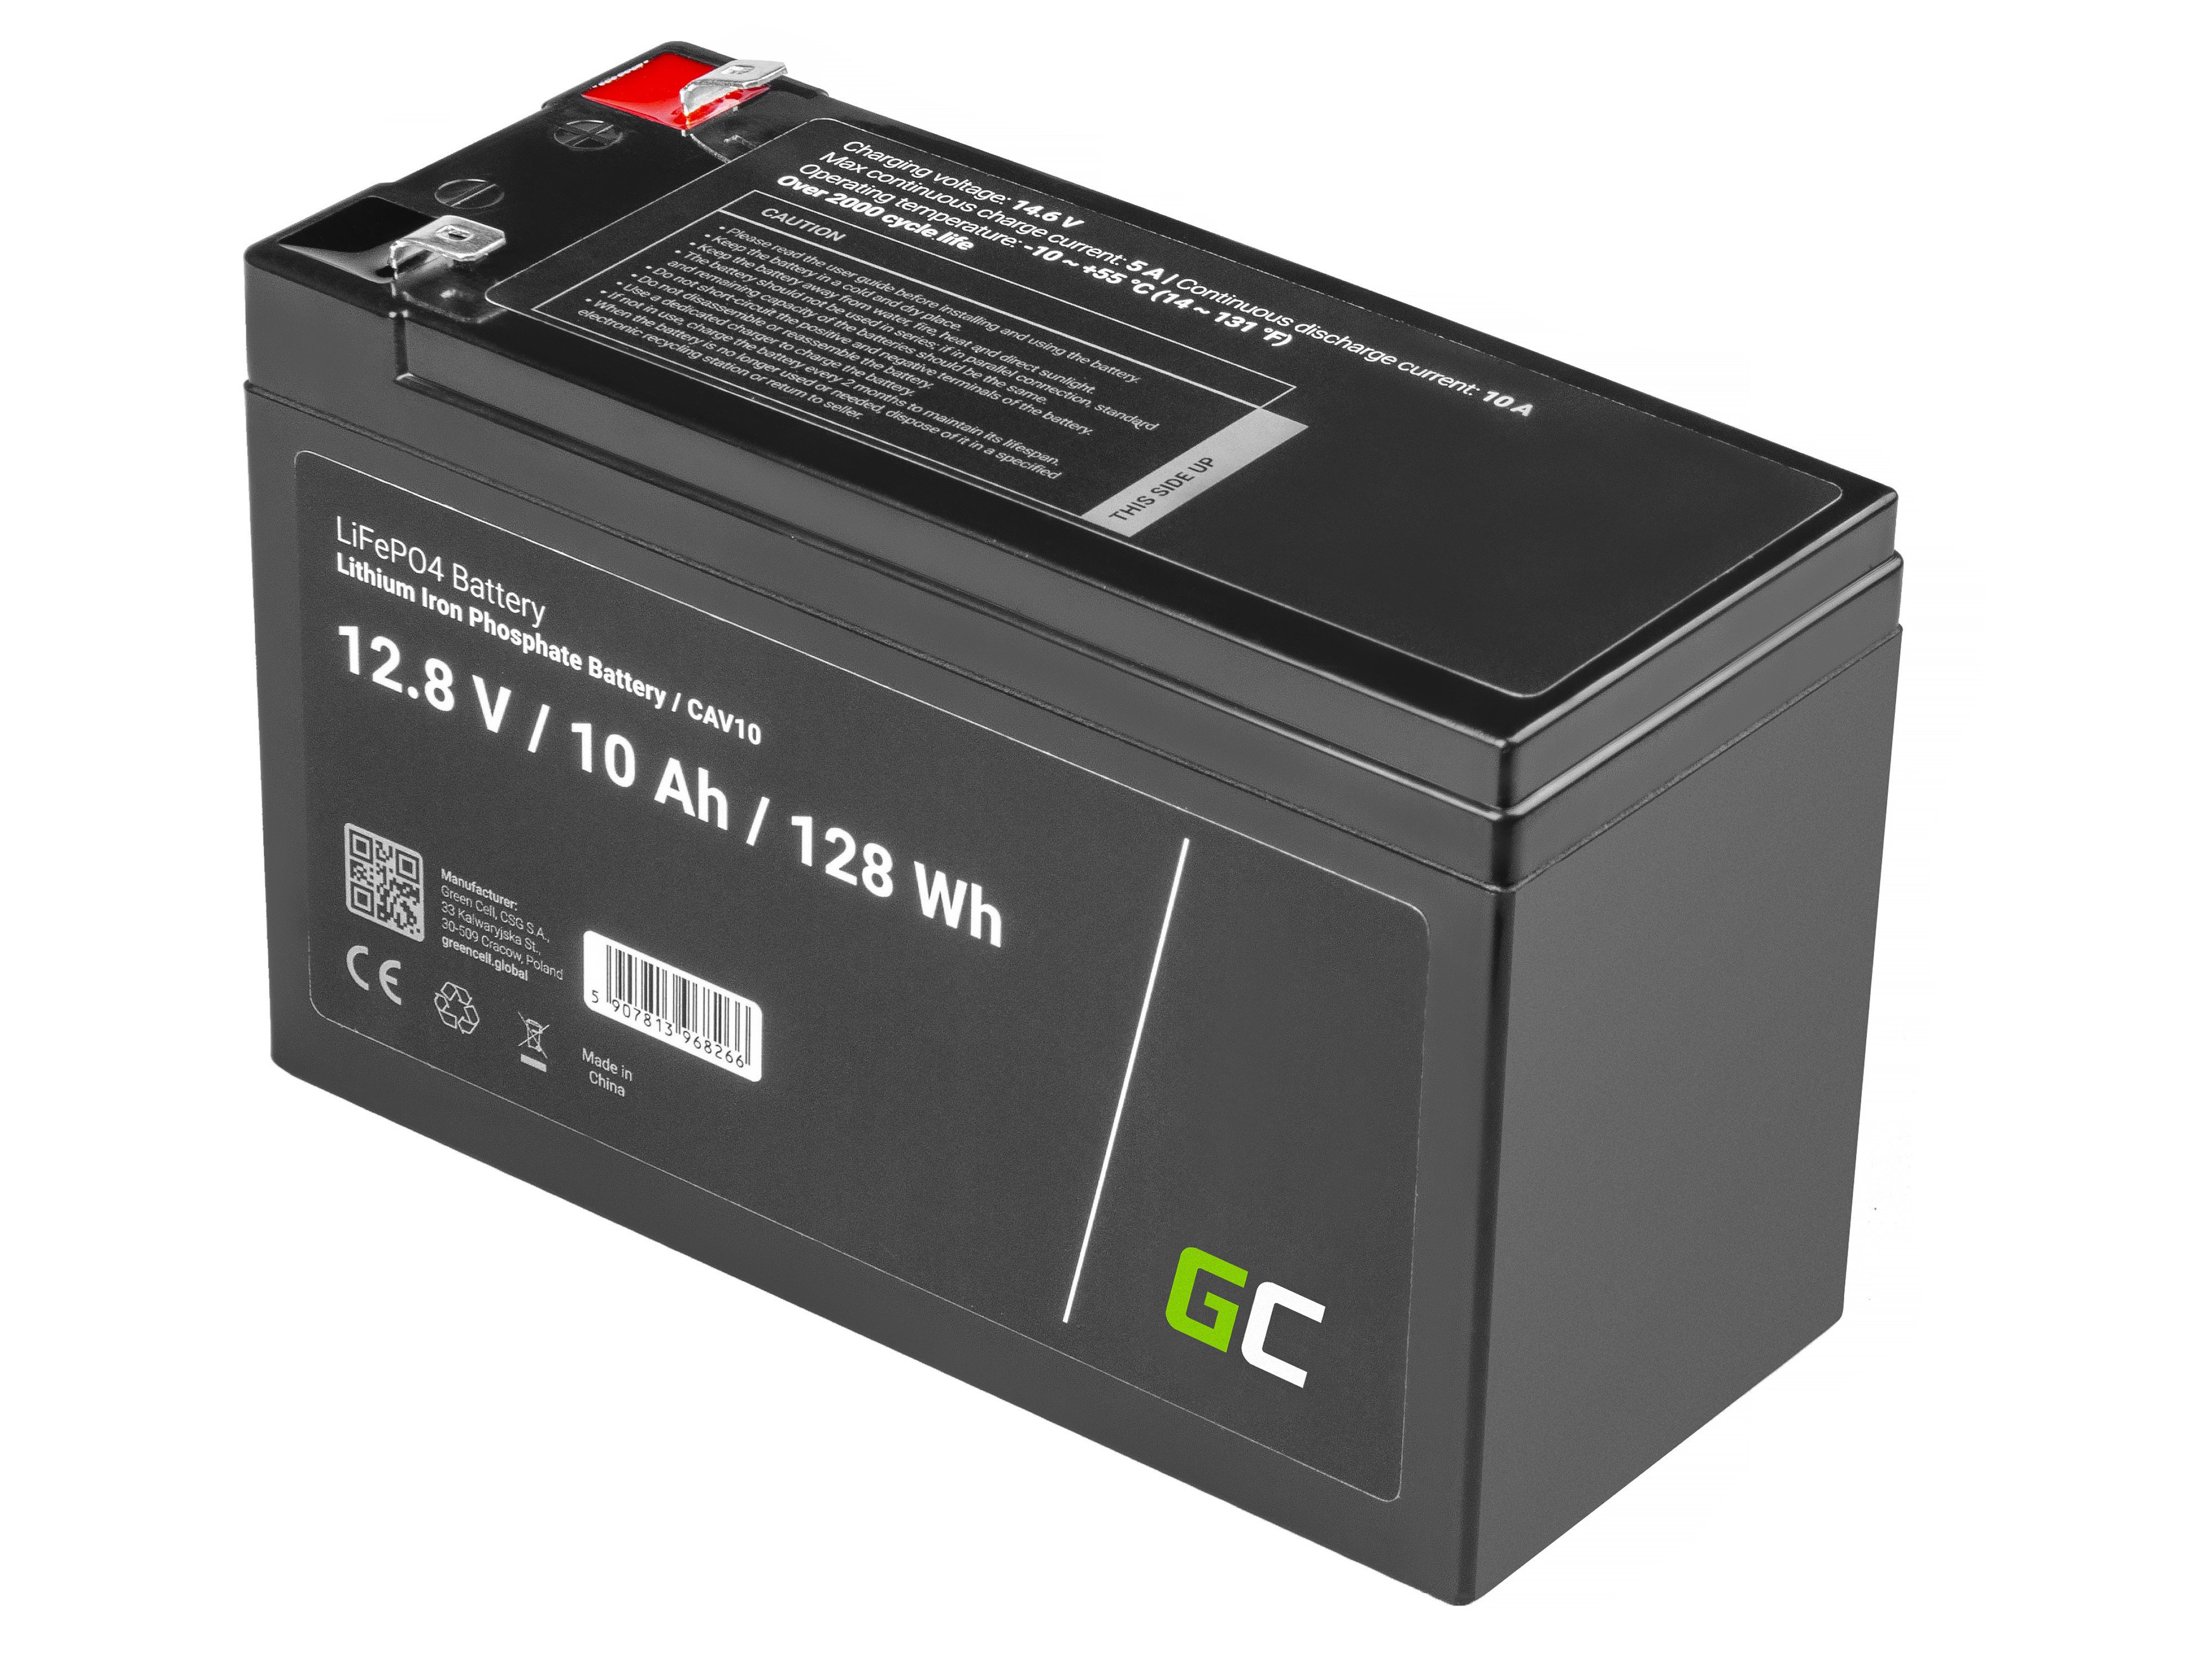 Battery Lithium-iron-phosphate LiFePO4 12V 12.8V 10Ah for photovoltaic system, campers and boats